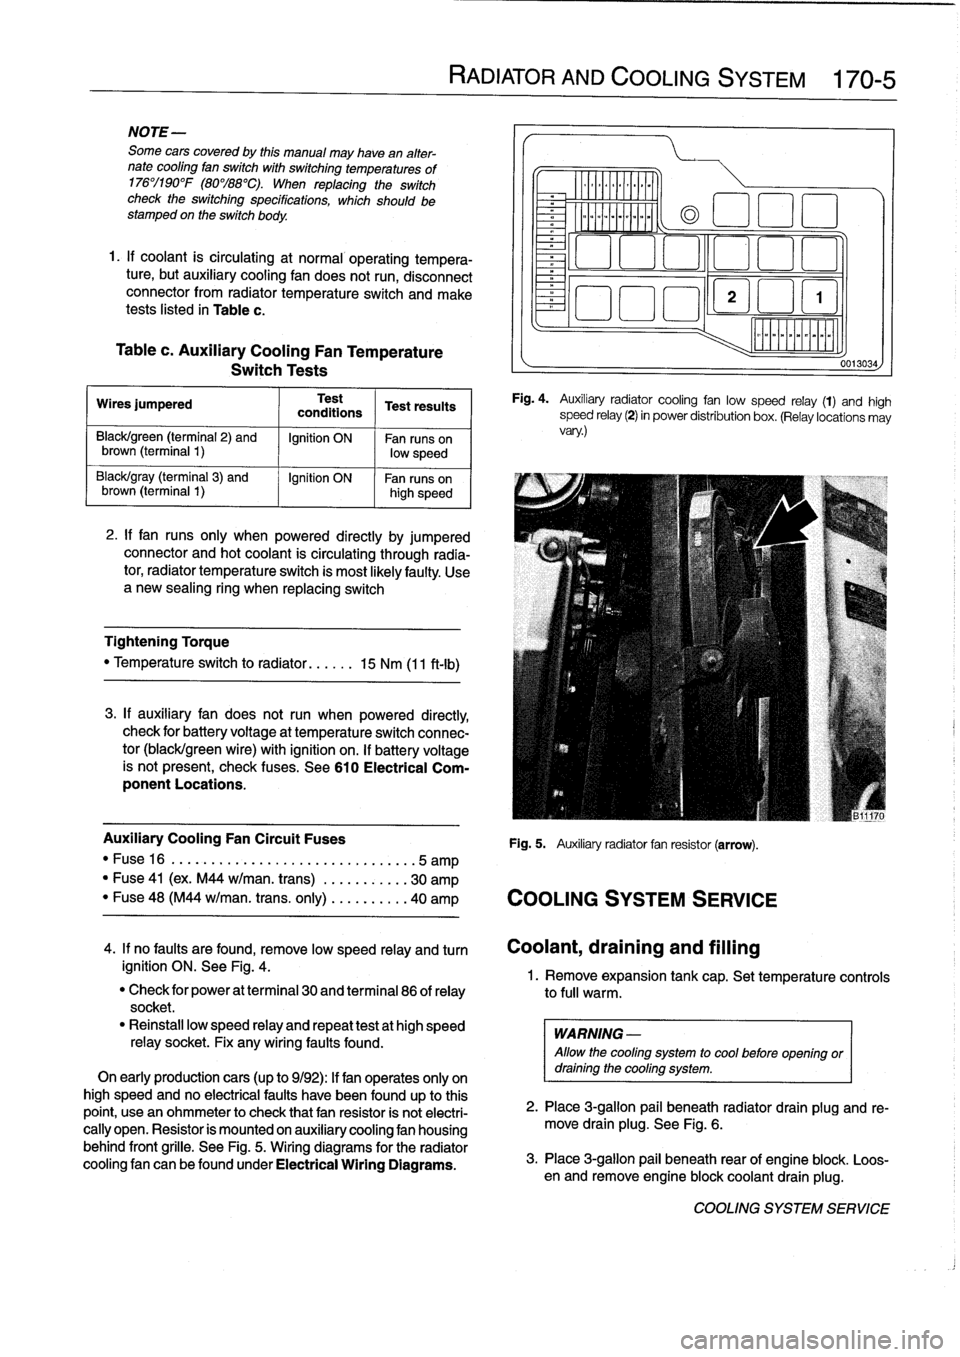 BMW 323i 1995 E36 Workshop Manual 
NOTE-

Some
cars
covered
by
this
manual
may
have
an
alter-
nate
cooling
fan
switchwith
switching
temperatures
of
176%190W
(80%88°C)
.
When
replacing
the
switch
check
theswitching
specifications,
whi